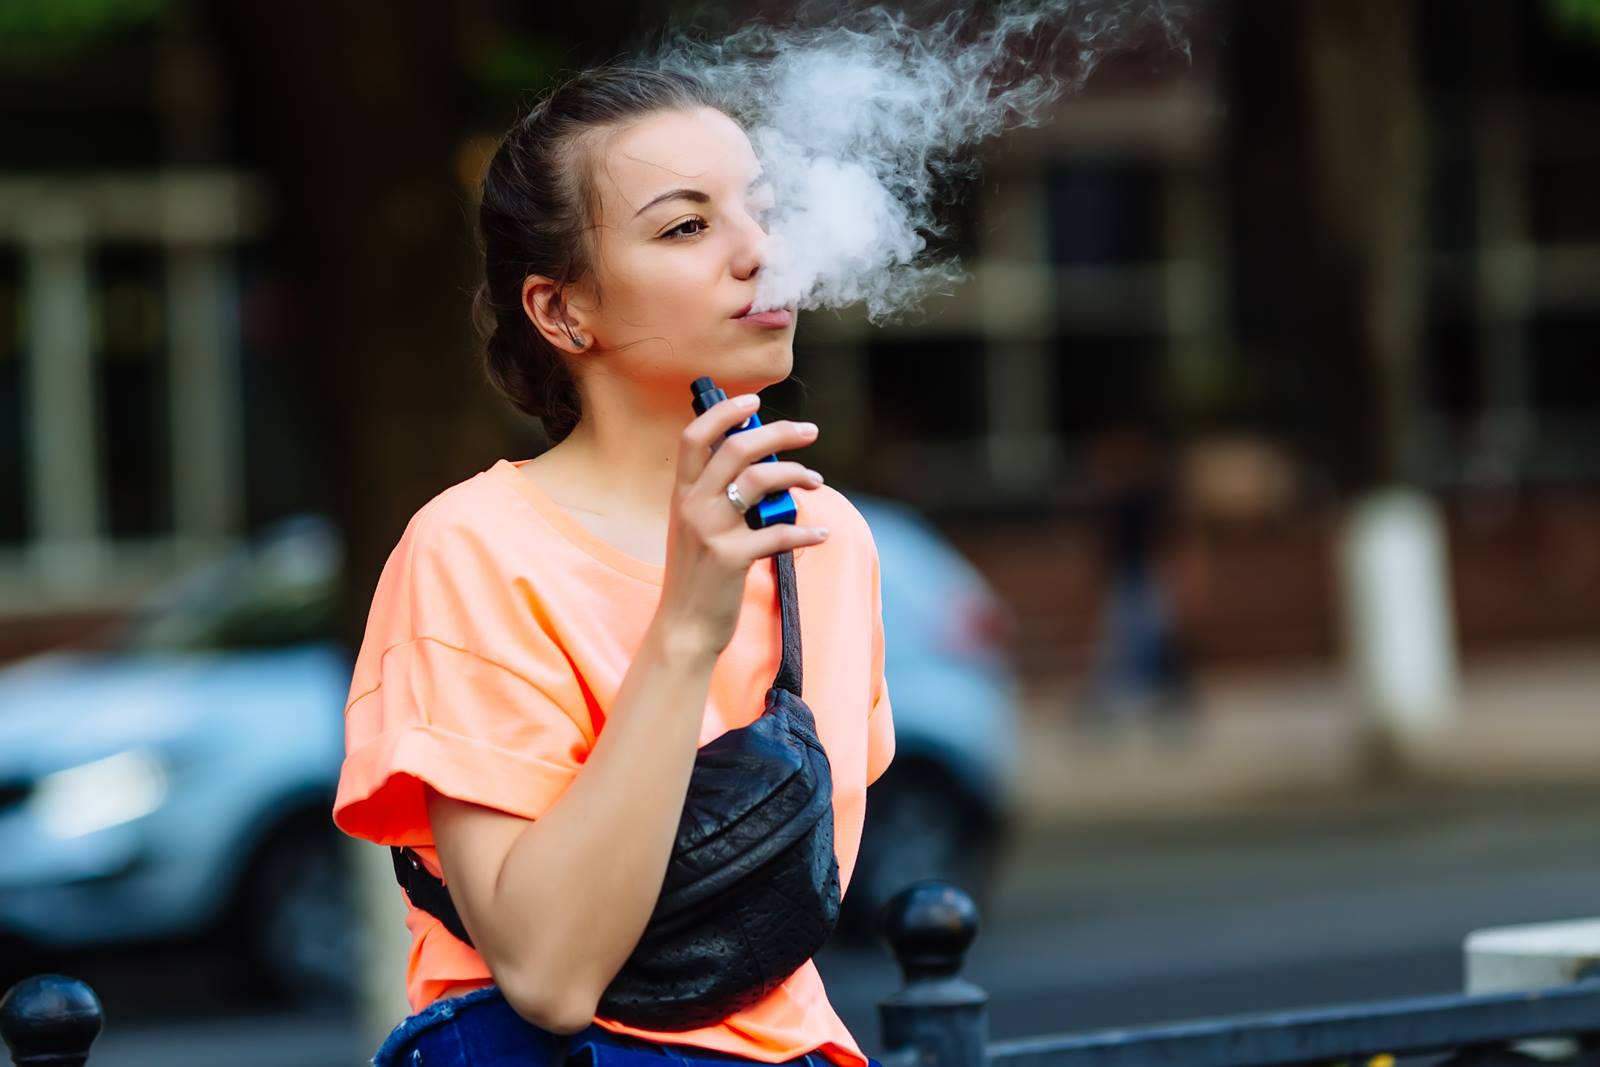 How to talk to your teen about the dangers of vaping